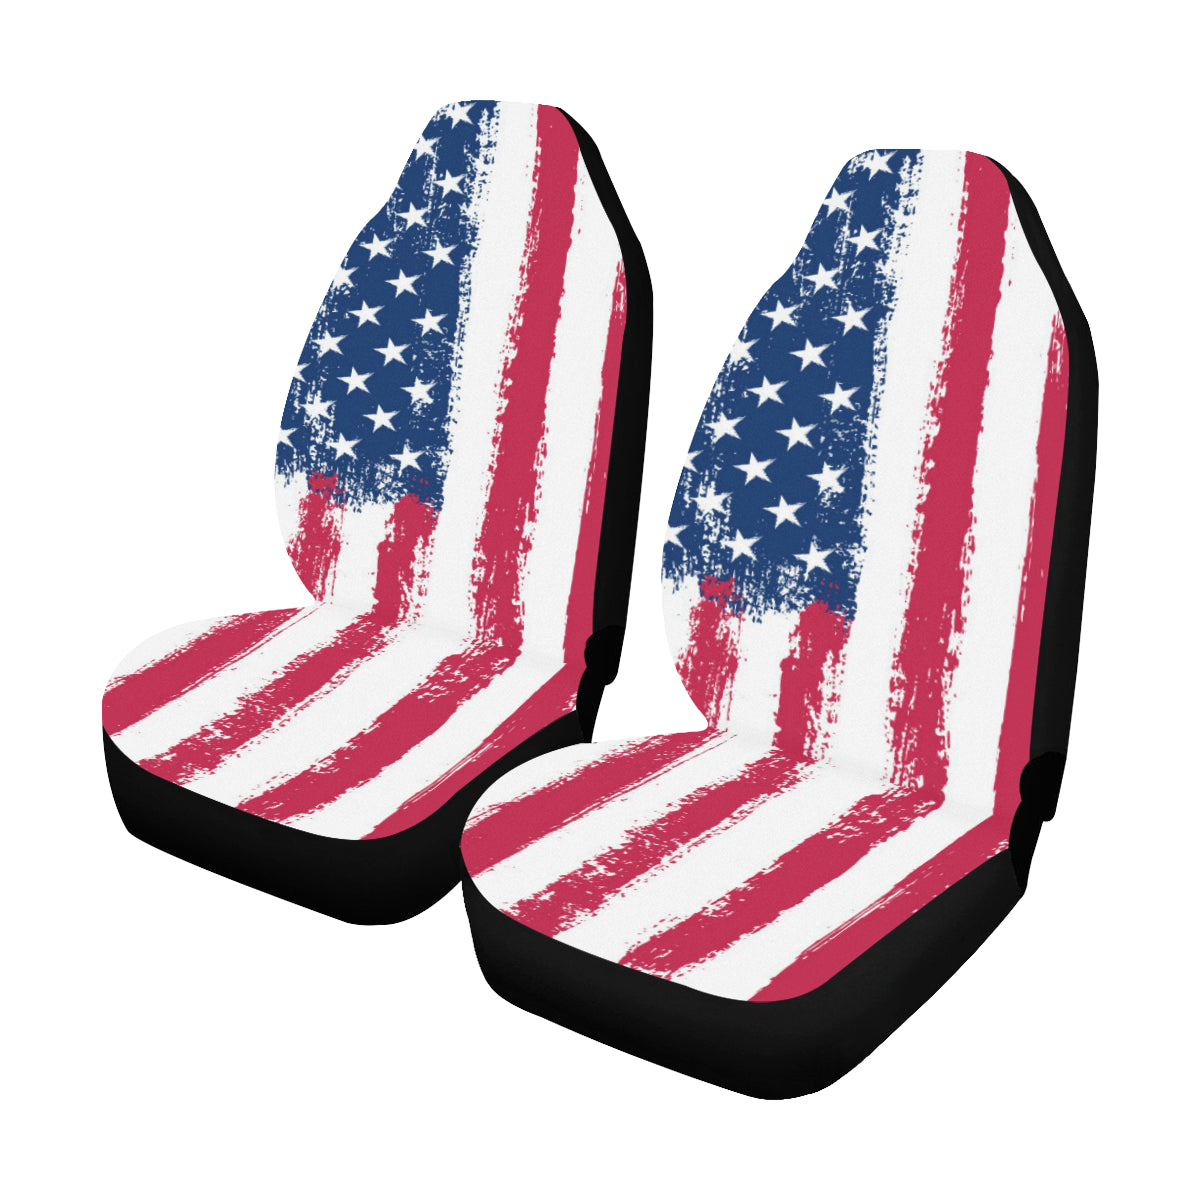 USA America Flag Car Seat Covers 2 pc, US Red White Blue Patriotic American Front Seat Covers, Car SUV Seat Protector Accessory Decoration Starcove Fashion